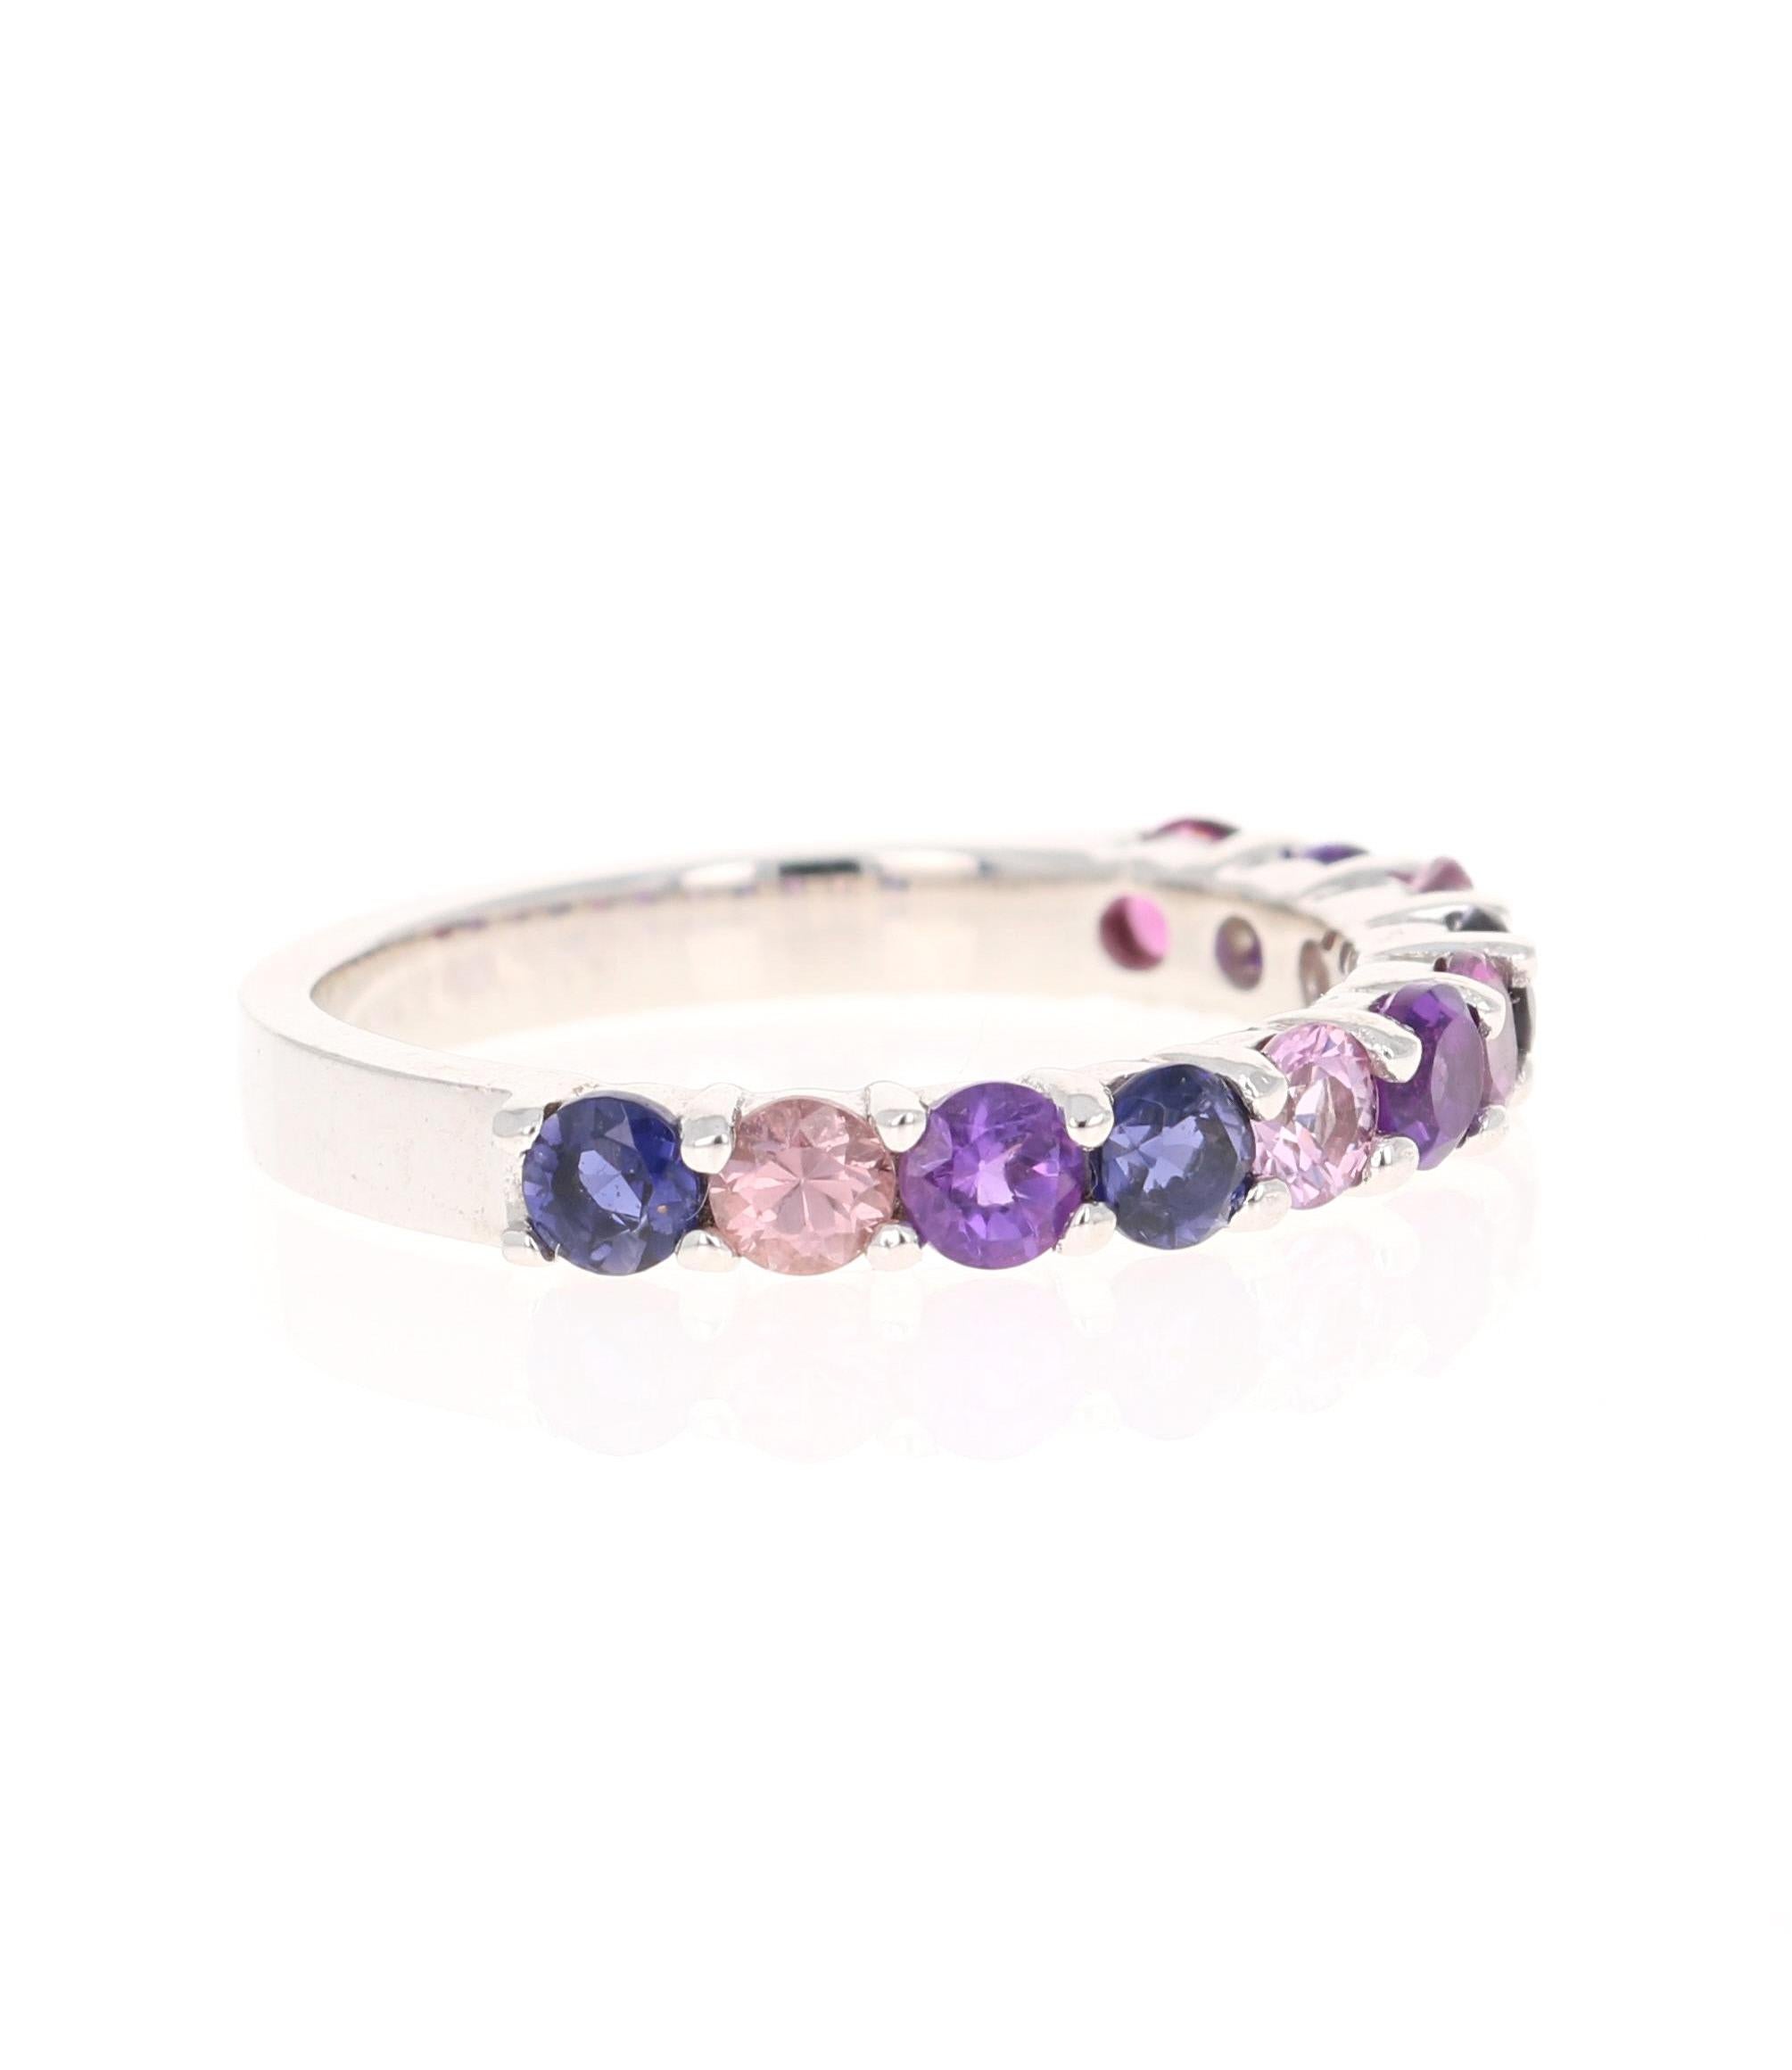 There are 11 Multicolored Genuine Gemstones in this band that weighs 1.49 Carats. The band has a mixture of Pink Sapphires, Amethysts and Purple Garnets!
It is perfect for everyday wear and looks amazing stacked or alone. They are versatile and can